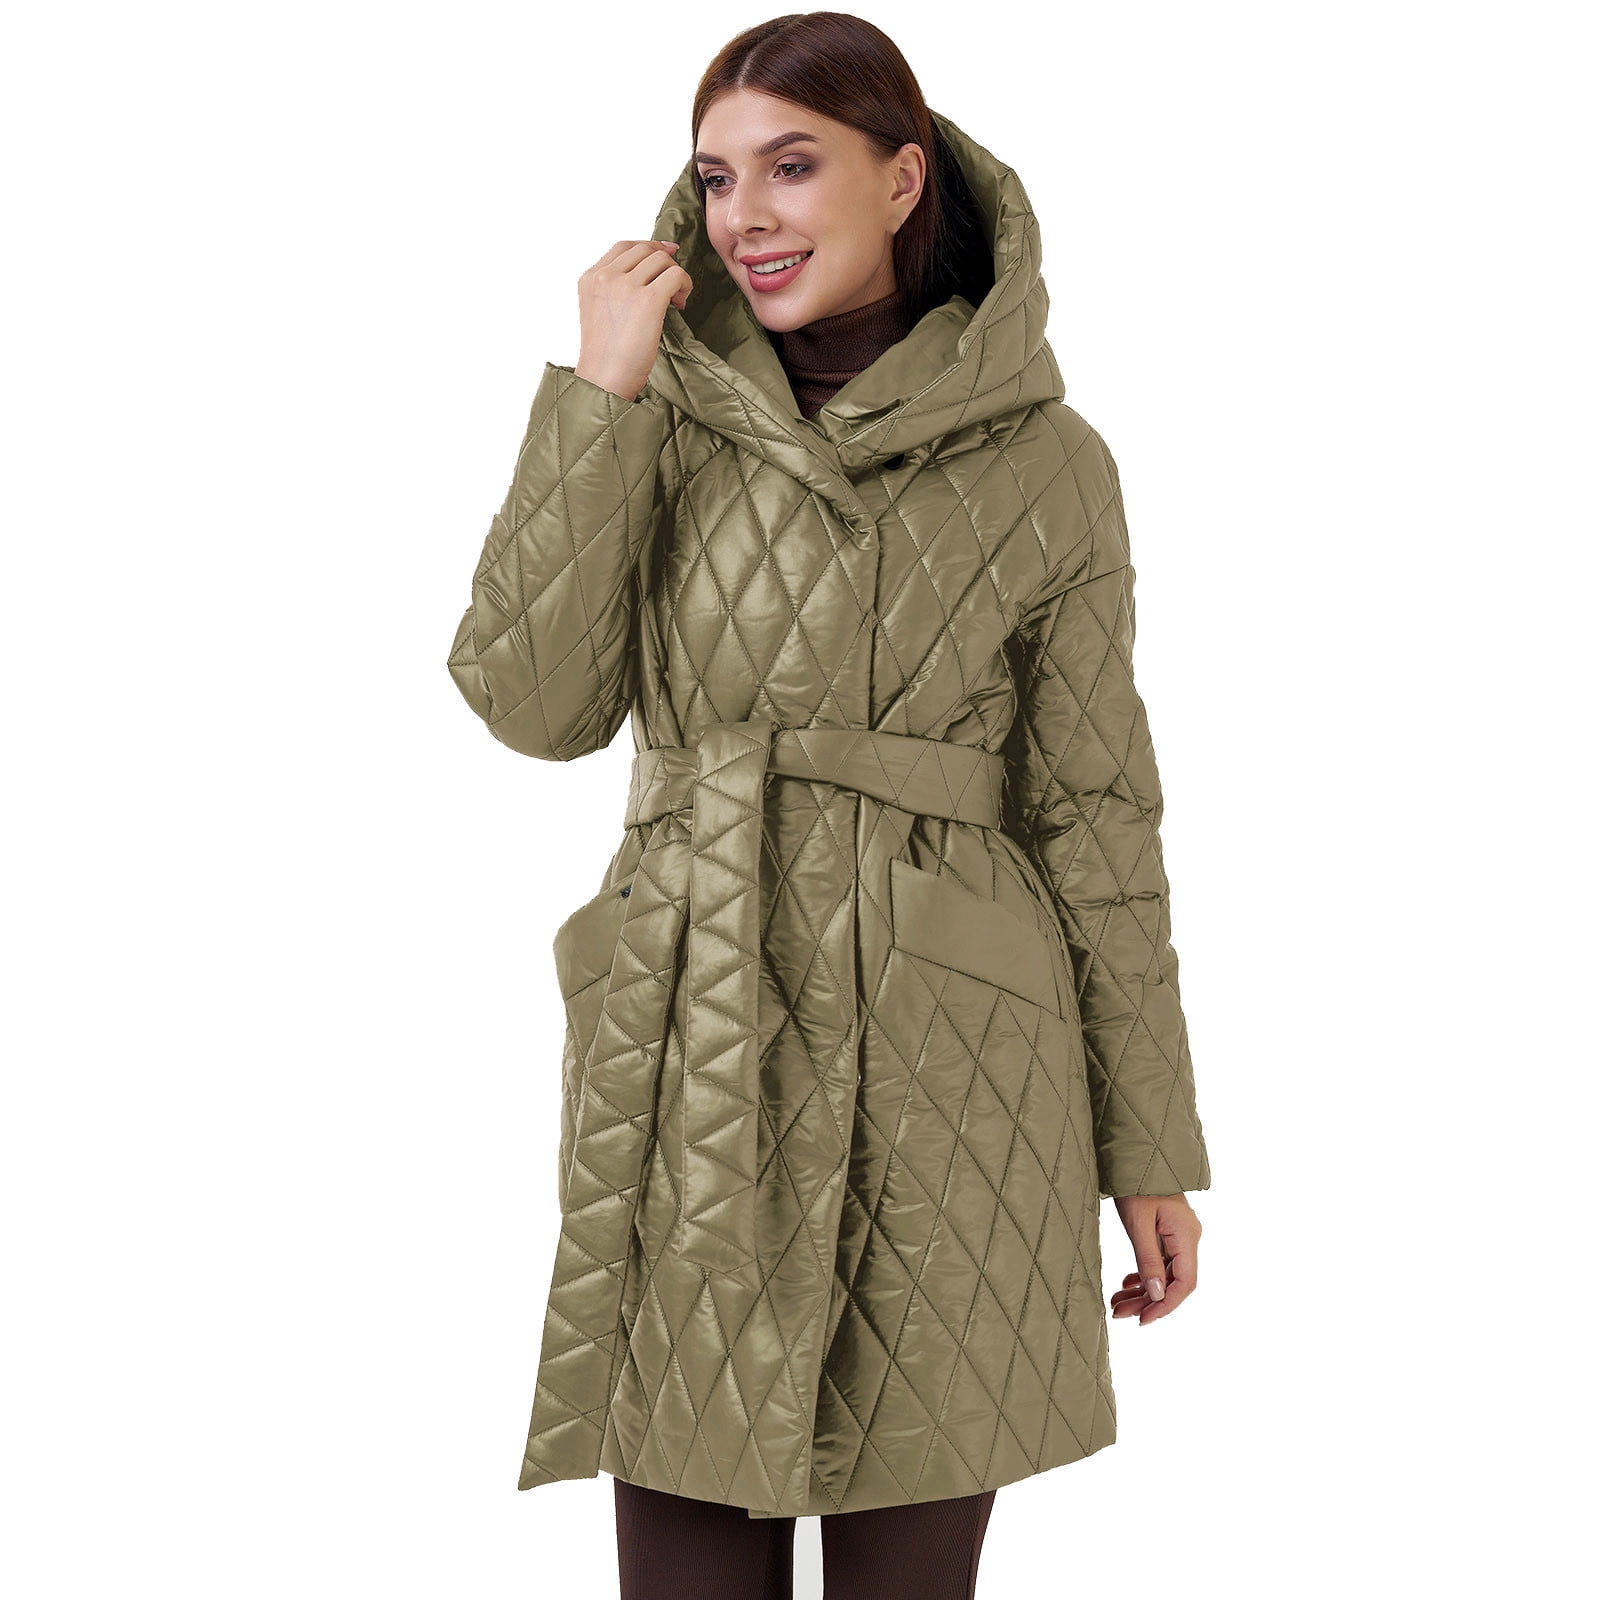 Hfyihgf Women Button Quilted Long Jacket Coat Winter Fashion Belted  Removable Padded Hood Puffer Outerwear With Pockets（Army Green,M) 